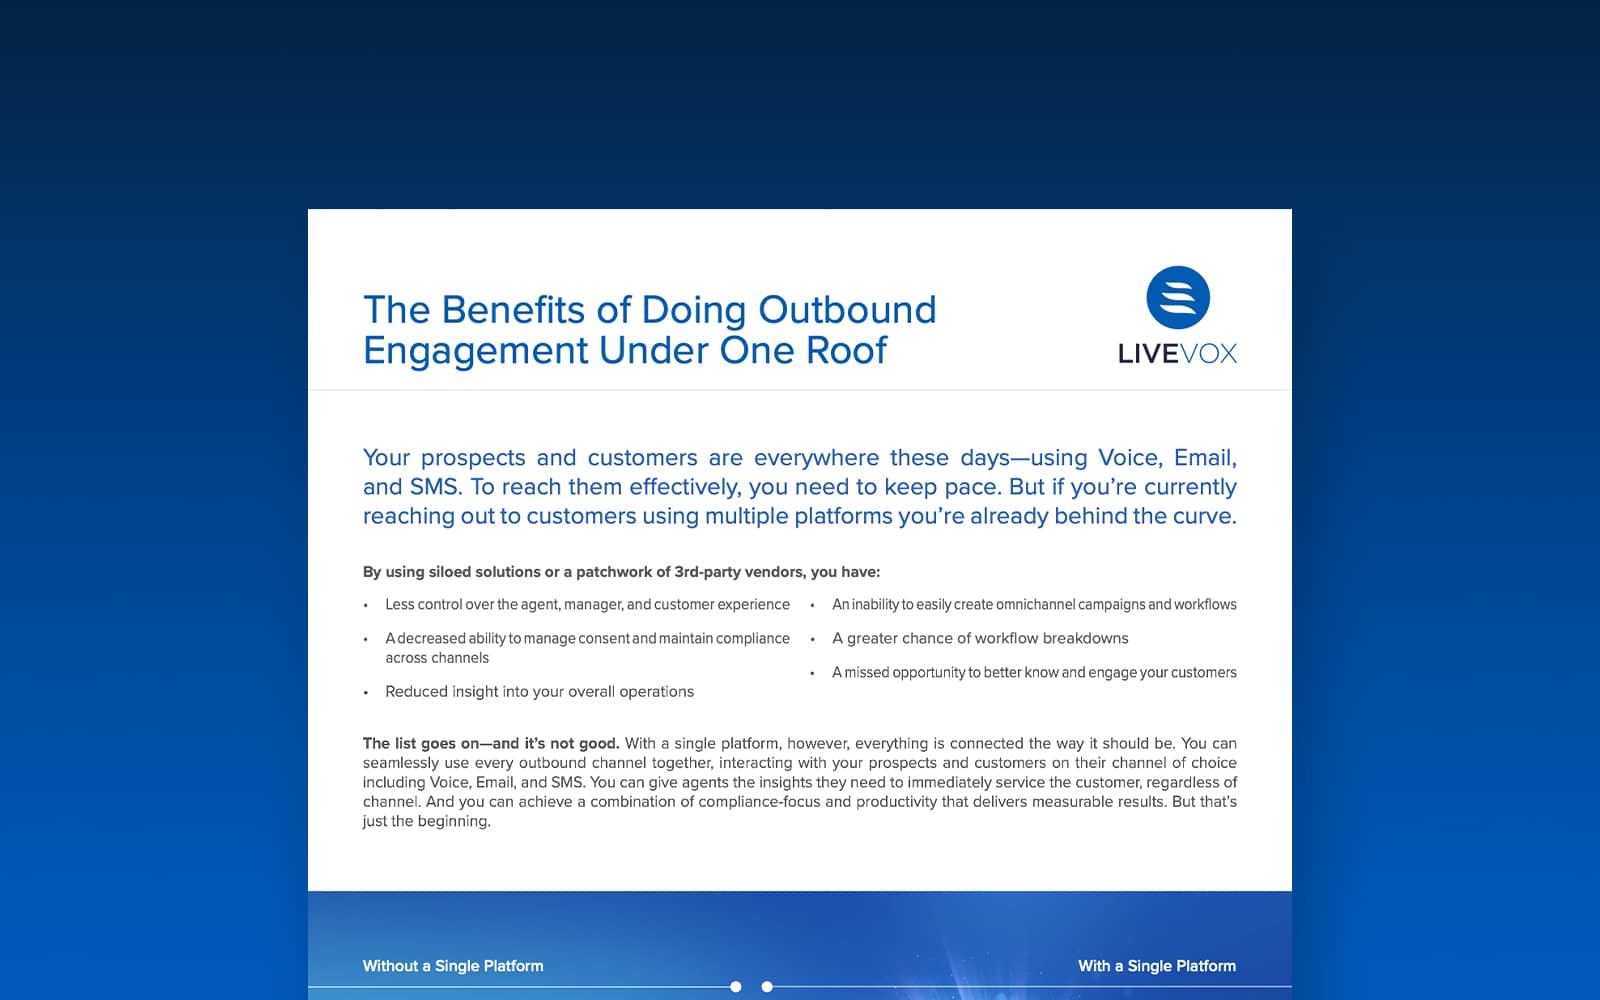 Tip Sheet: Benefits of Doing Outbound Under One Roof